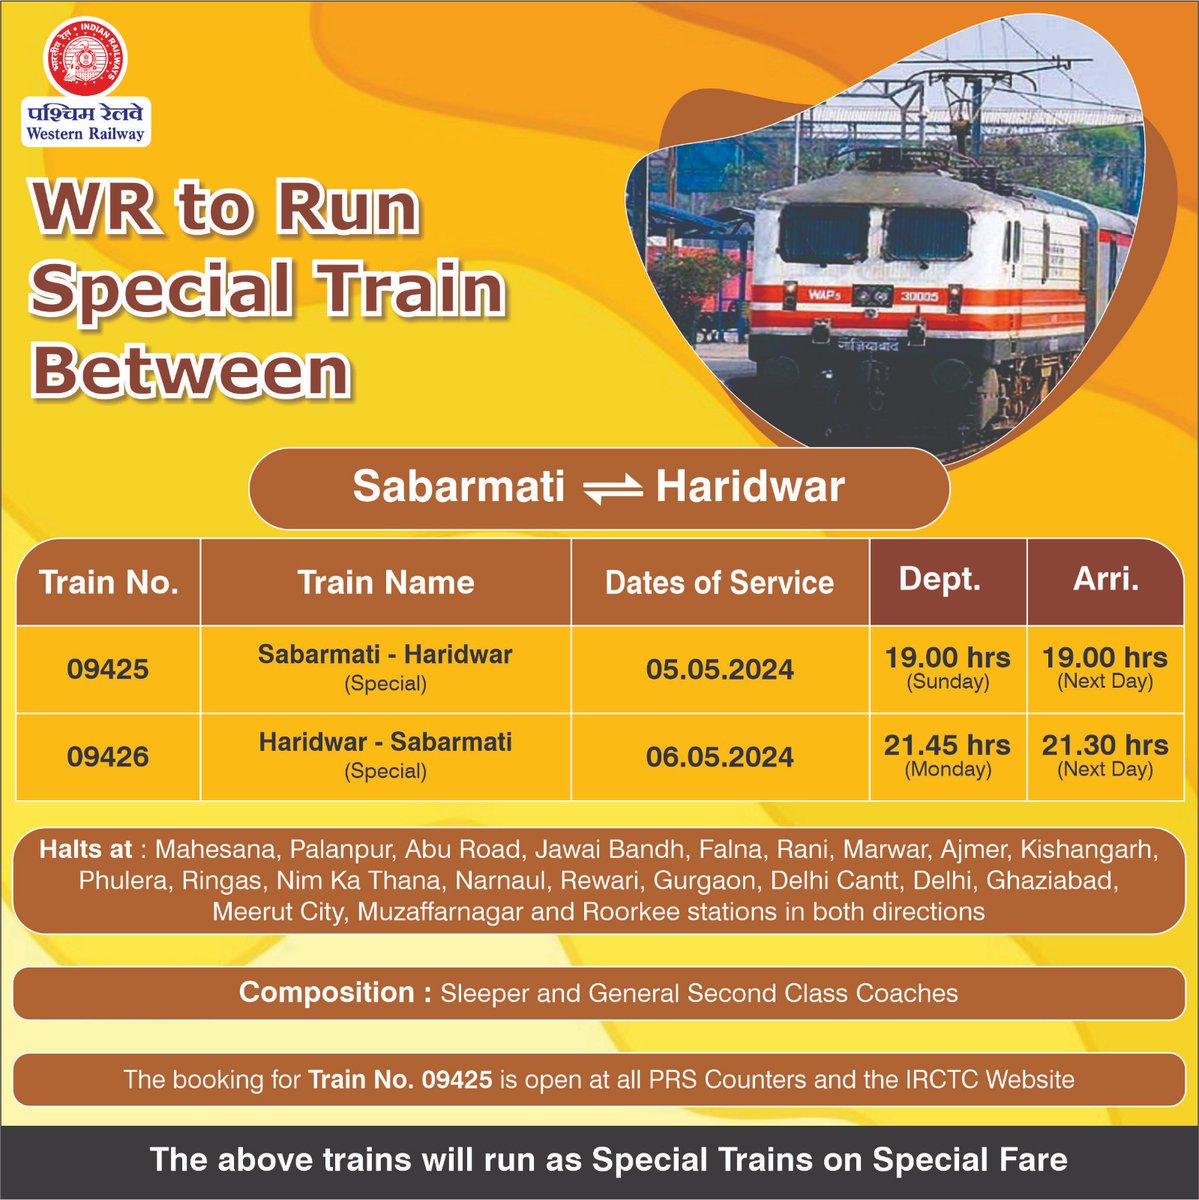 WR will run 09425 Sabarmati - Haridwar Special for the convenience of passengers and to meet the travel demand. 

The booking for train no. 09425 is open at PRS counters and the IRCTC website. 

#WRUpdates